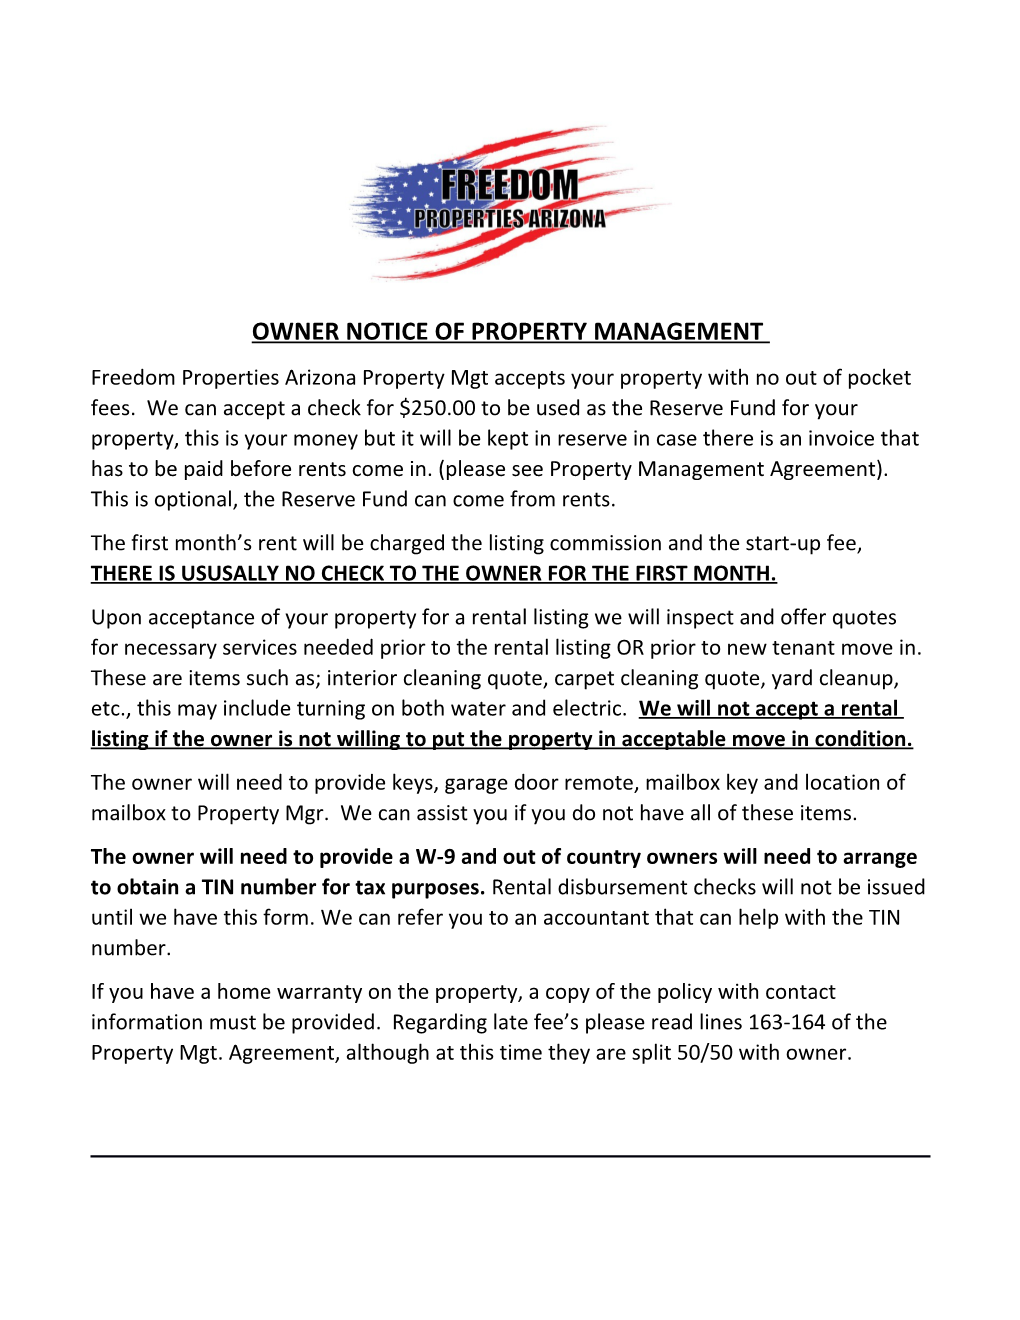 Owner Notice of Property Management